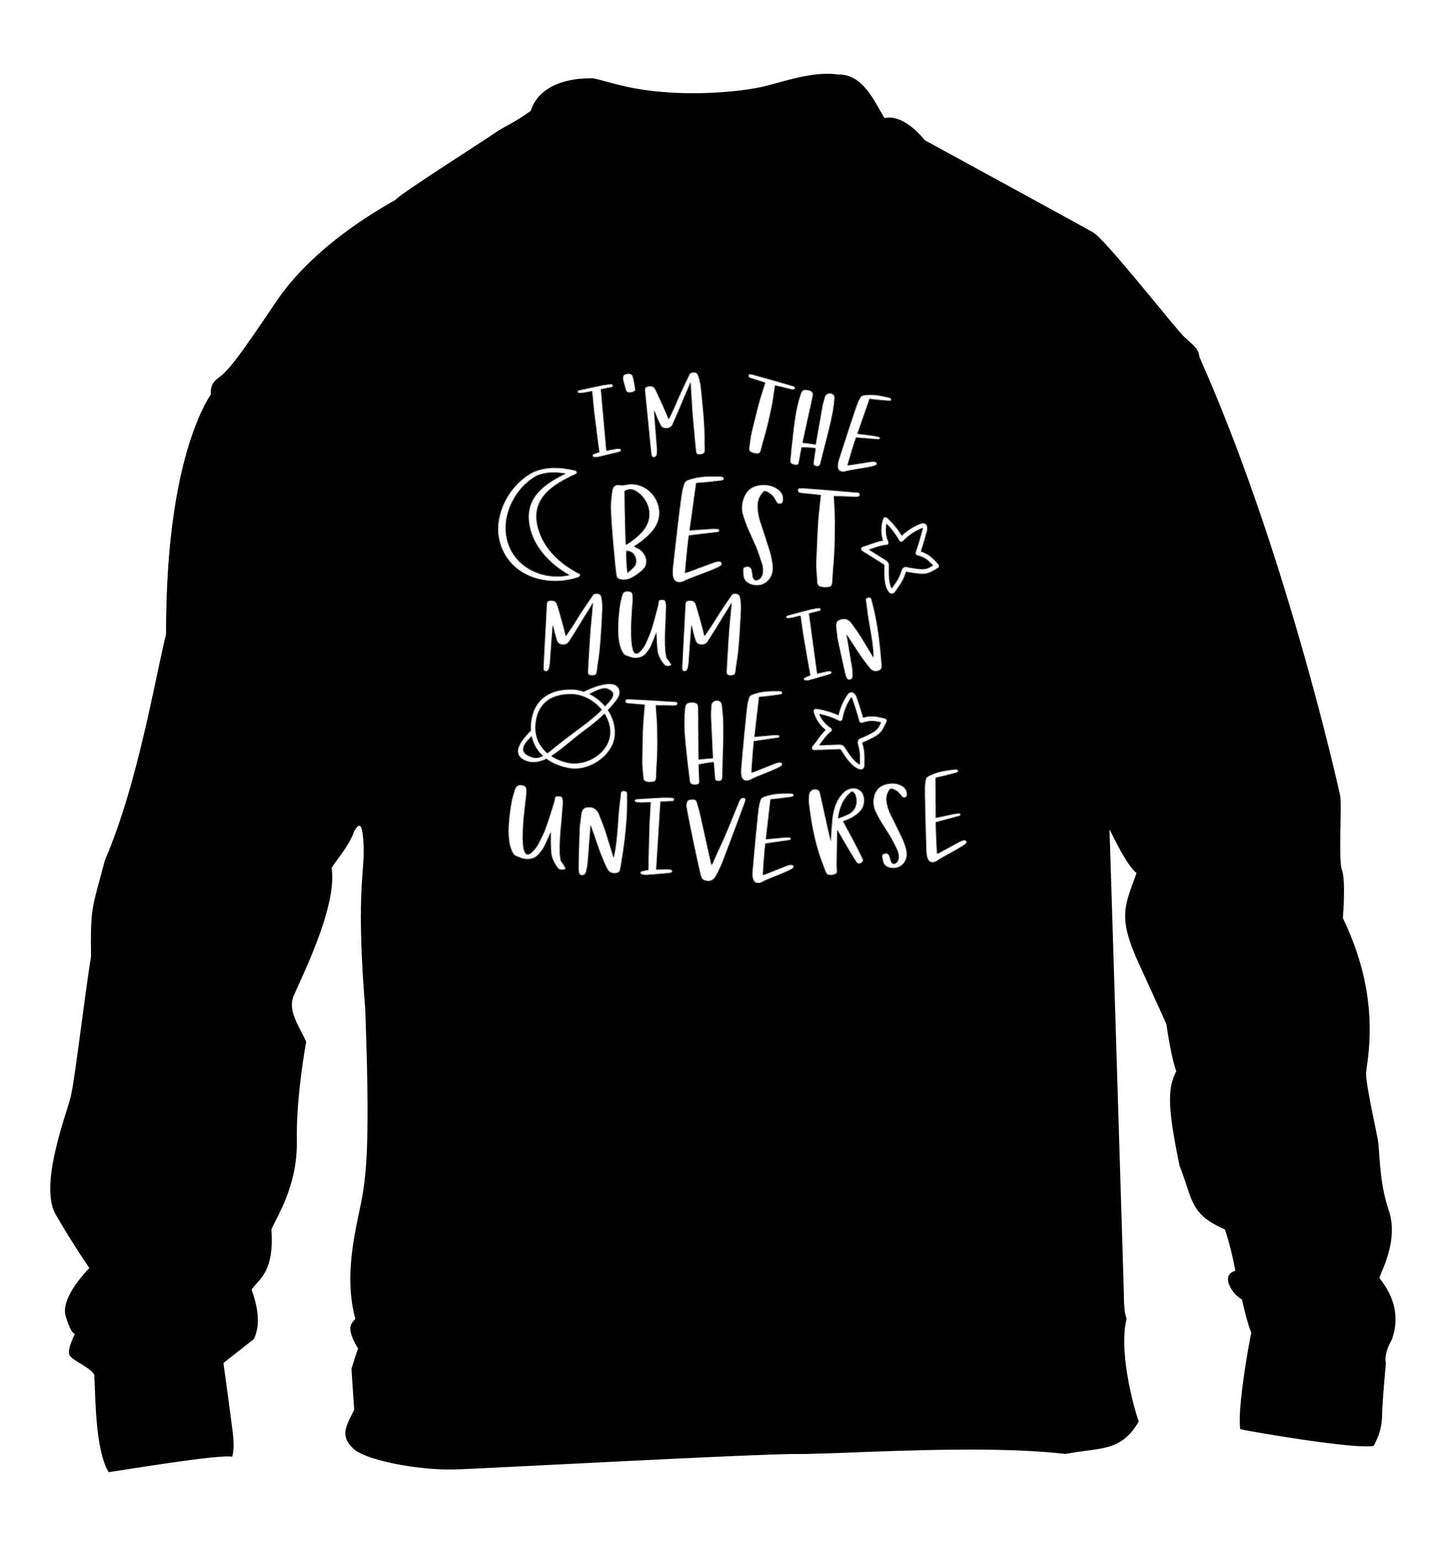 I'm the best mum in the universe children's black sweater 12-13 Years